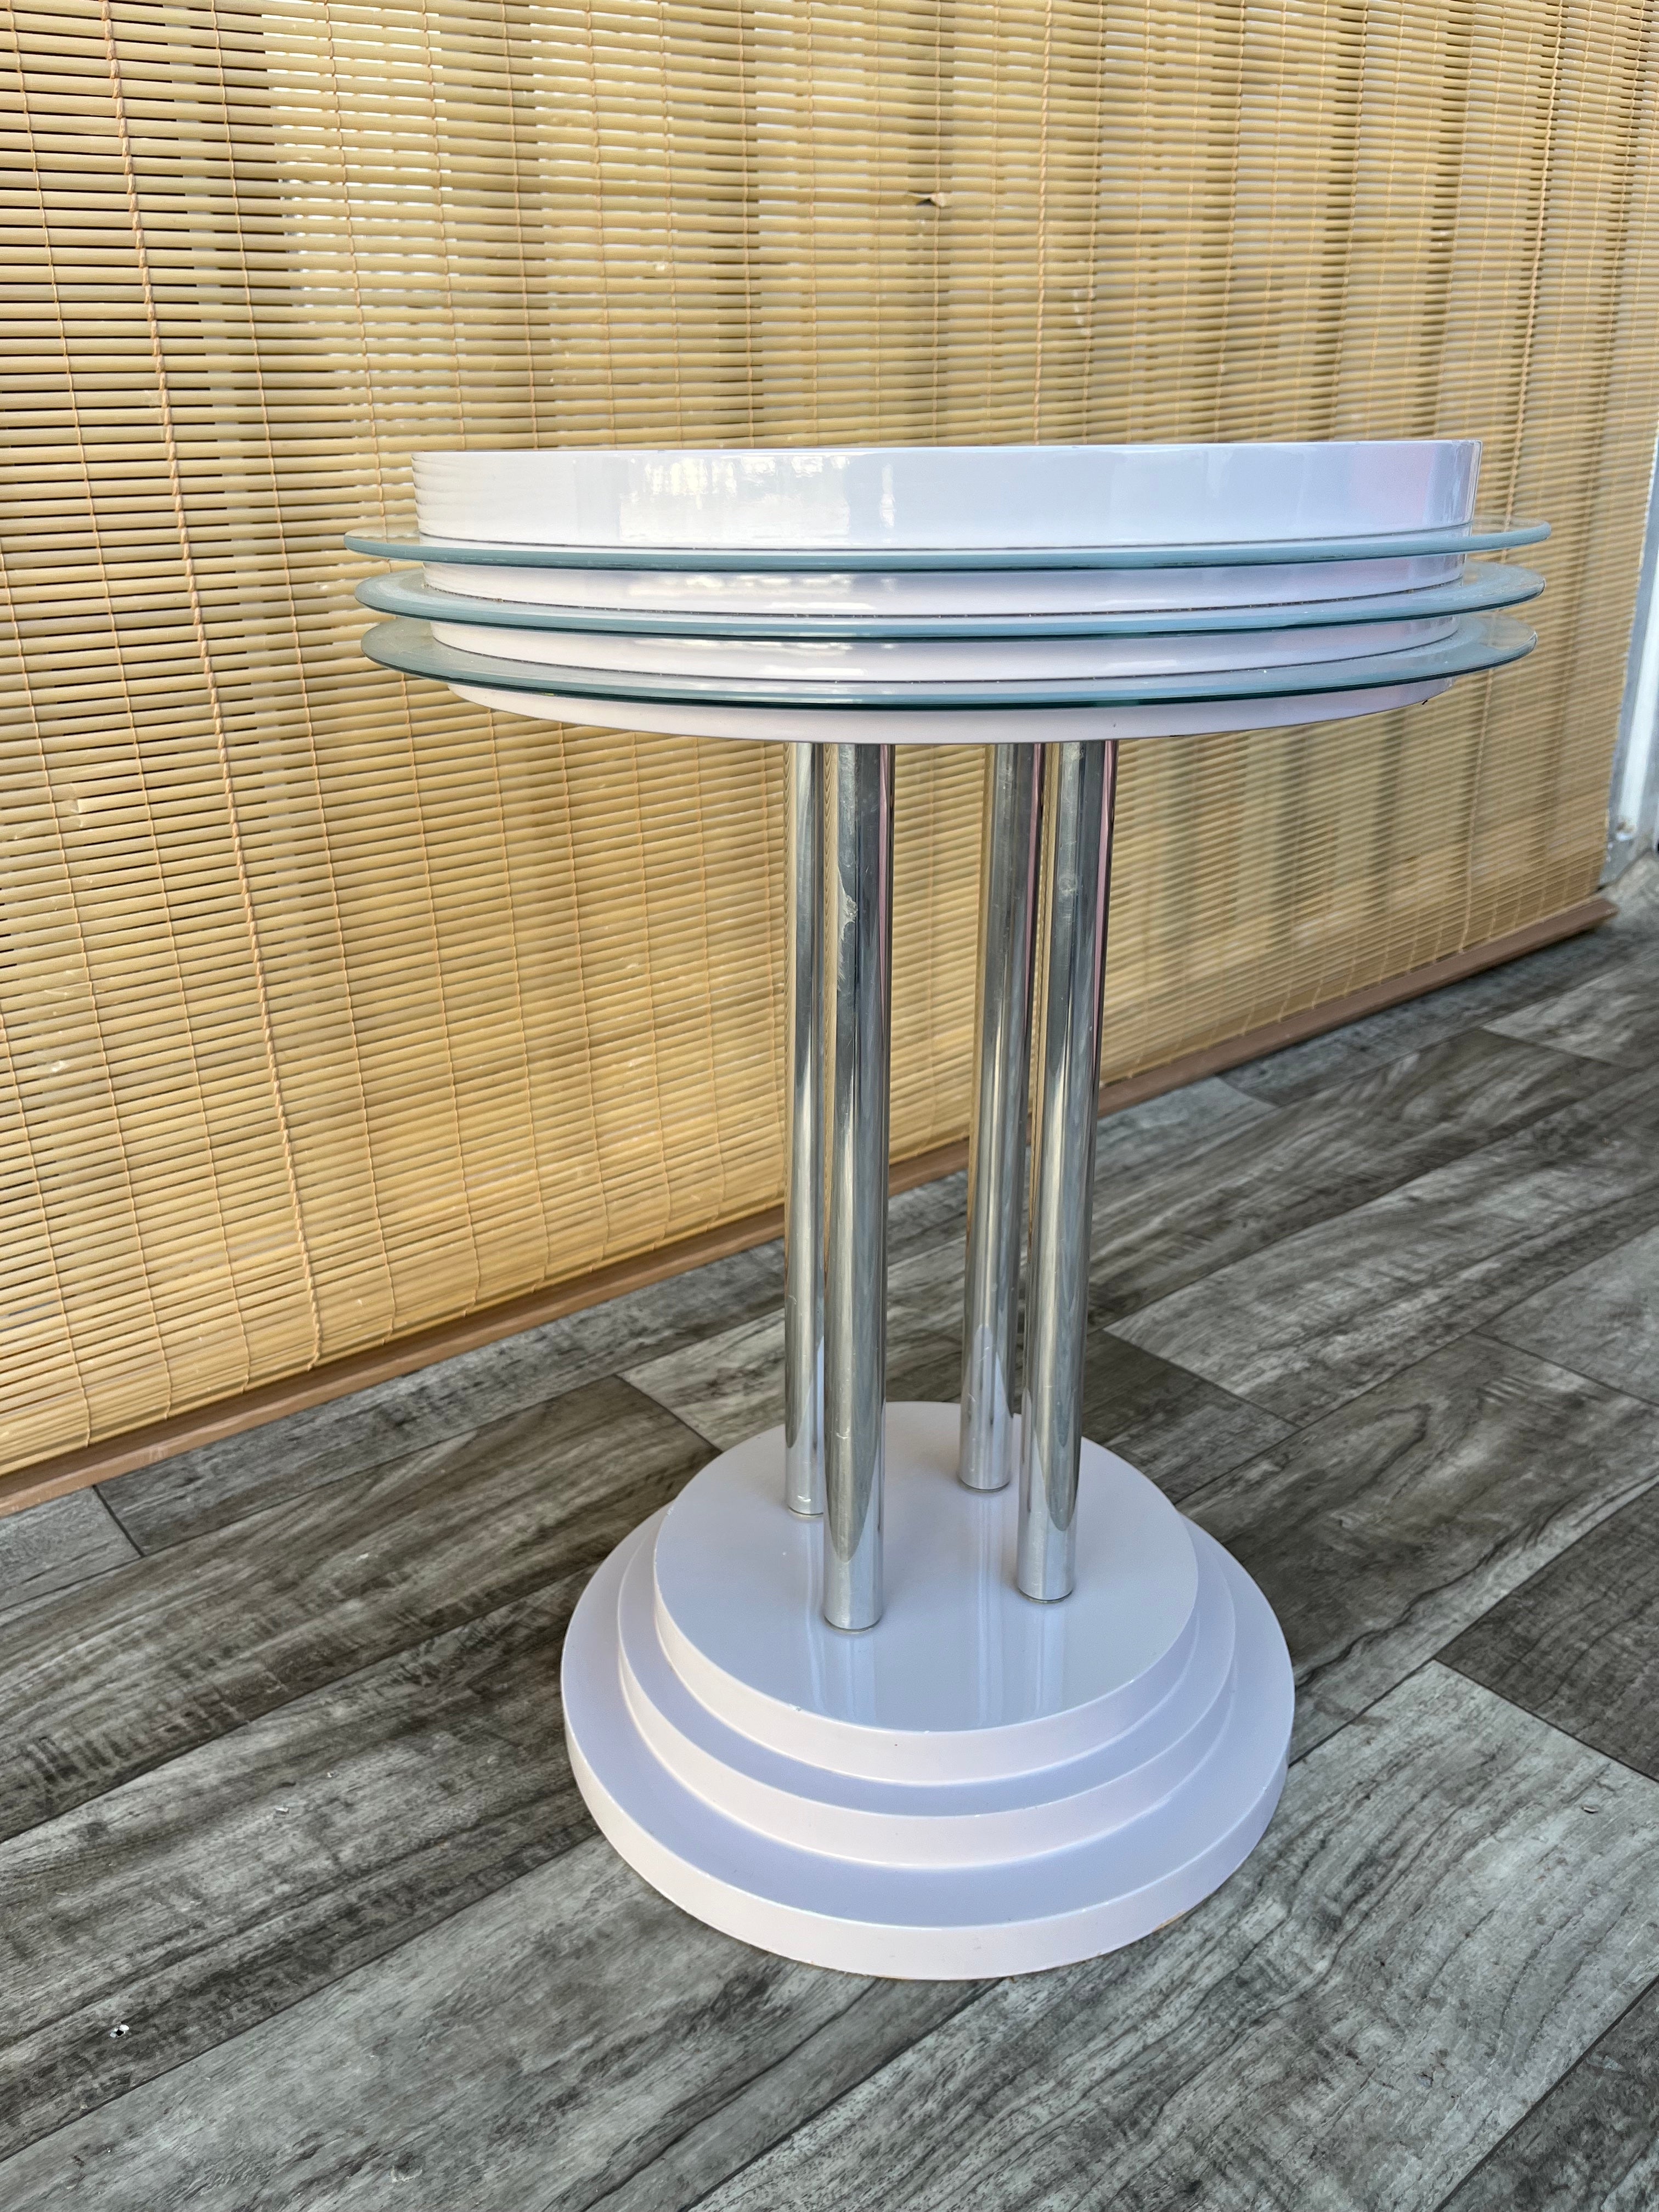 Vintage Postmodern Side Table in the Memphis Group Style. Circa 1980s
Features a quintessential 1980s postmodern design, with chrome pedestals, pastel colors lacquer and glass inserts.
In excellent original conditions, with very minor signs of wear